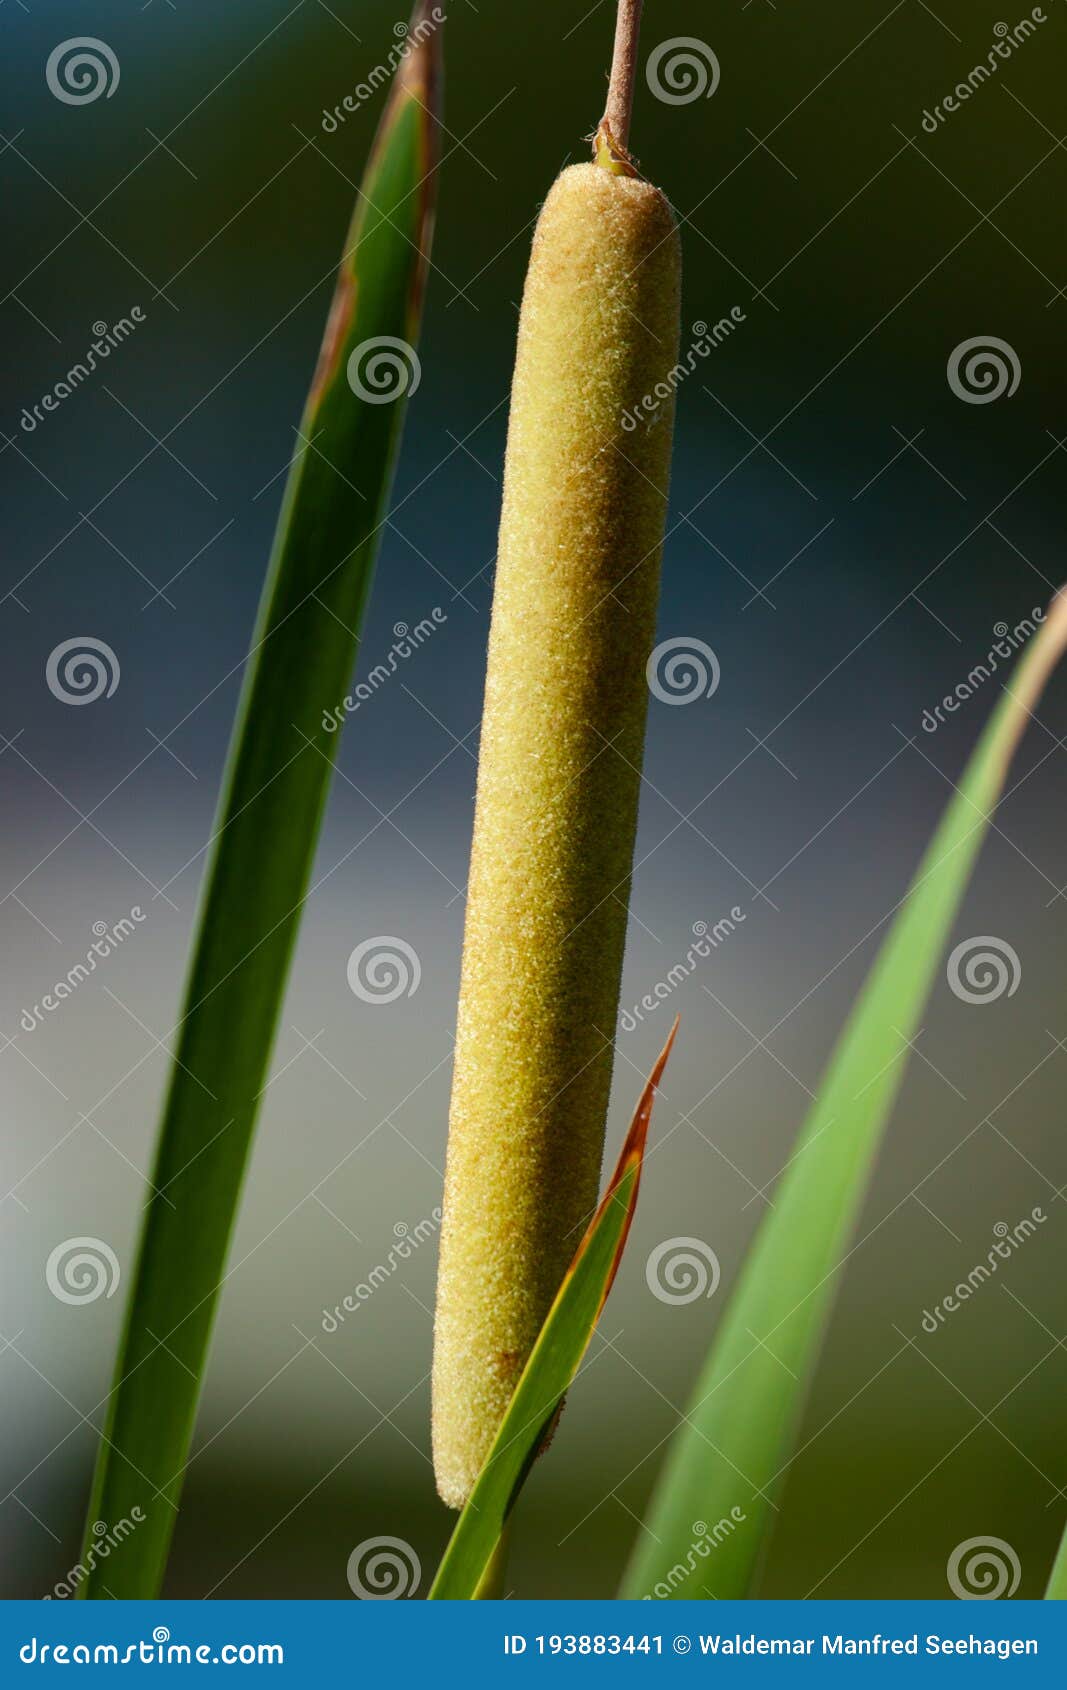 southern cattail or cumbungi typha domingensis against blurred background. minimalism inspiration.